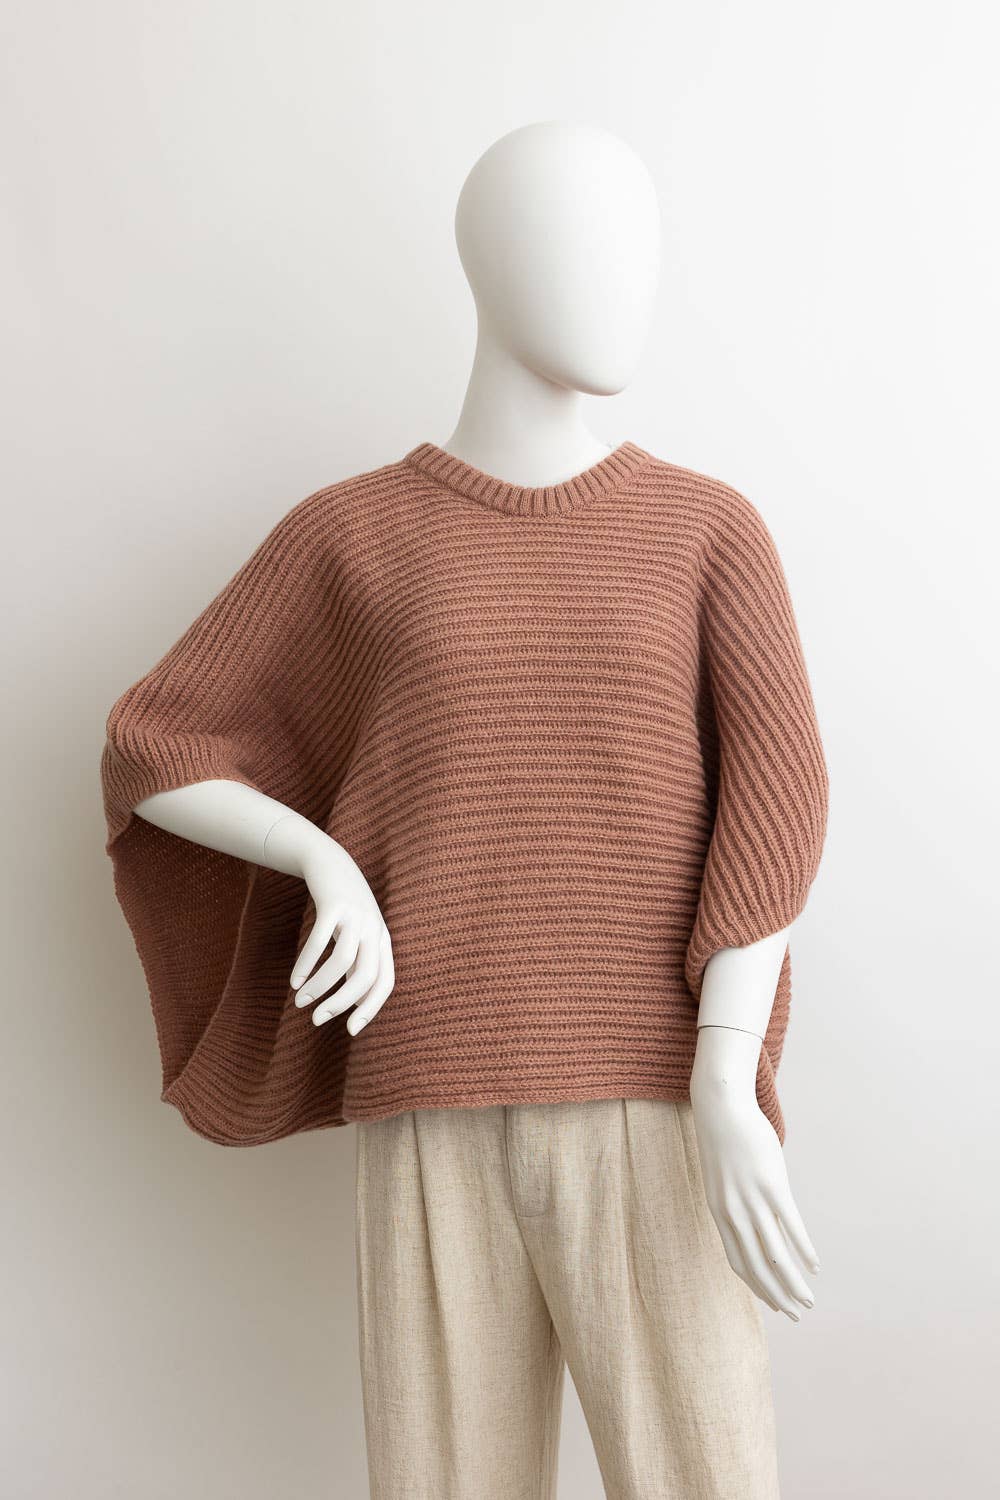 Urban Chic Ribbed Knit Sleeve Poncho - Whimsical Details